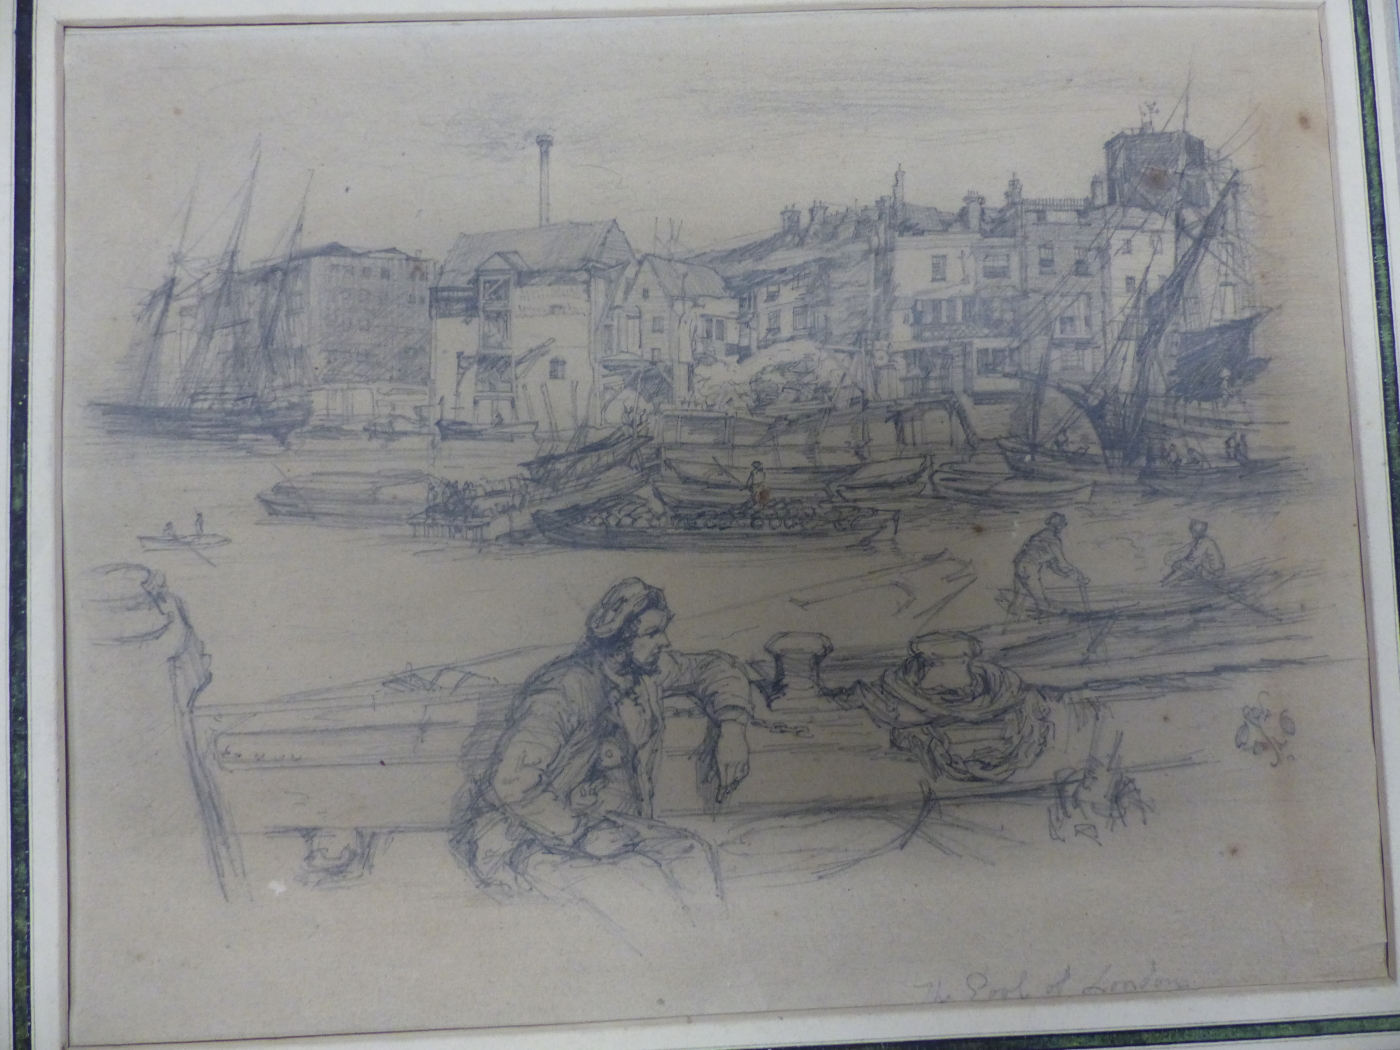 LATE 19th.C. ENGLISH SCHOOL. THE POOL OF LONDON, PENCIL DRAWING, UNFRAMED. 20 x 26cms.